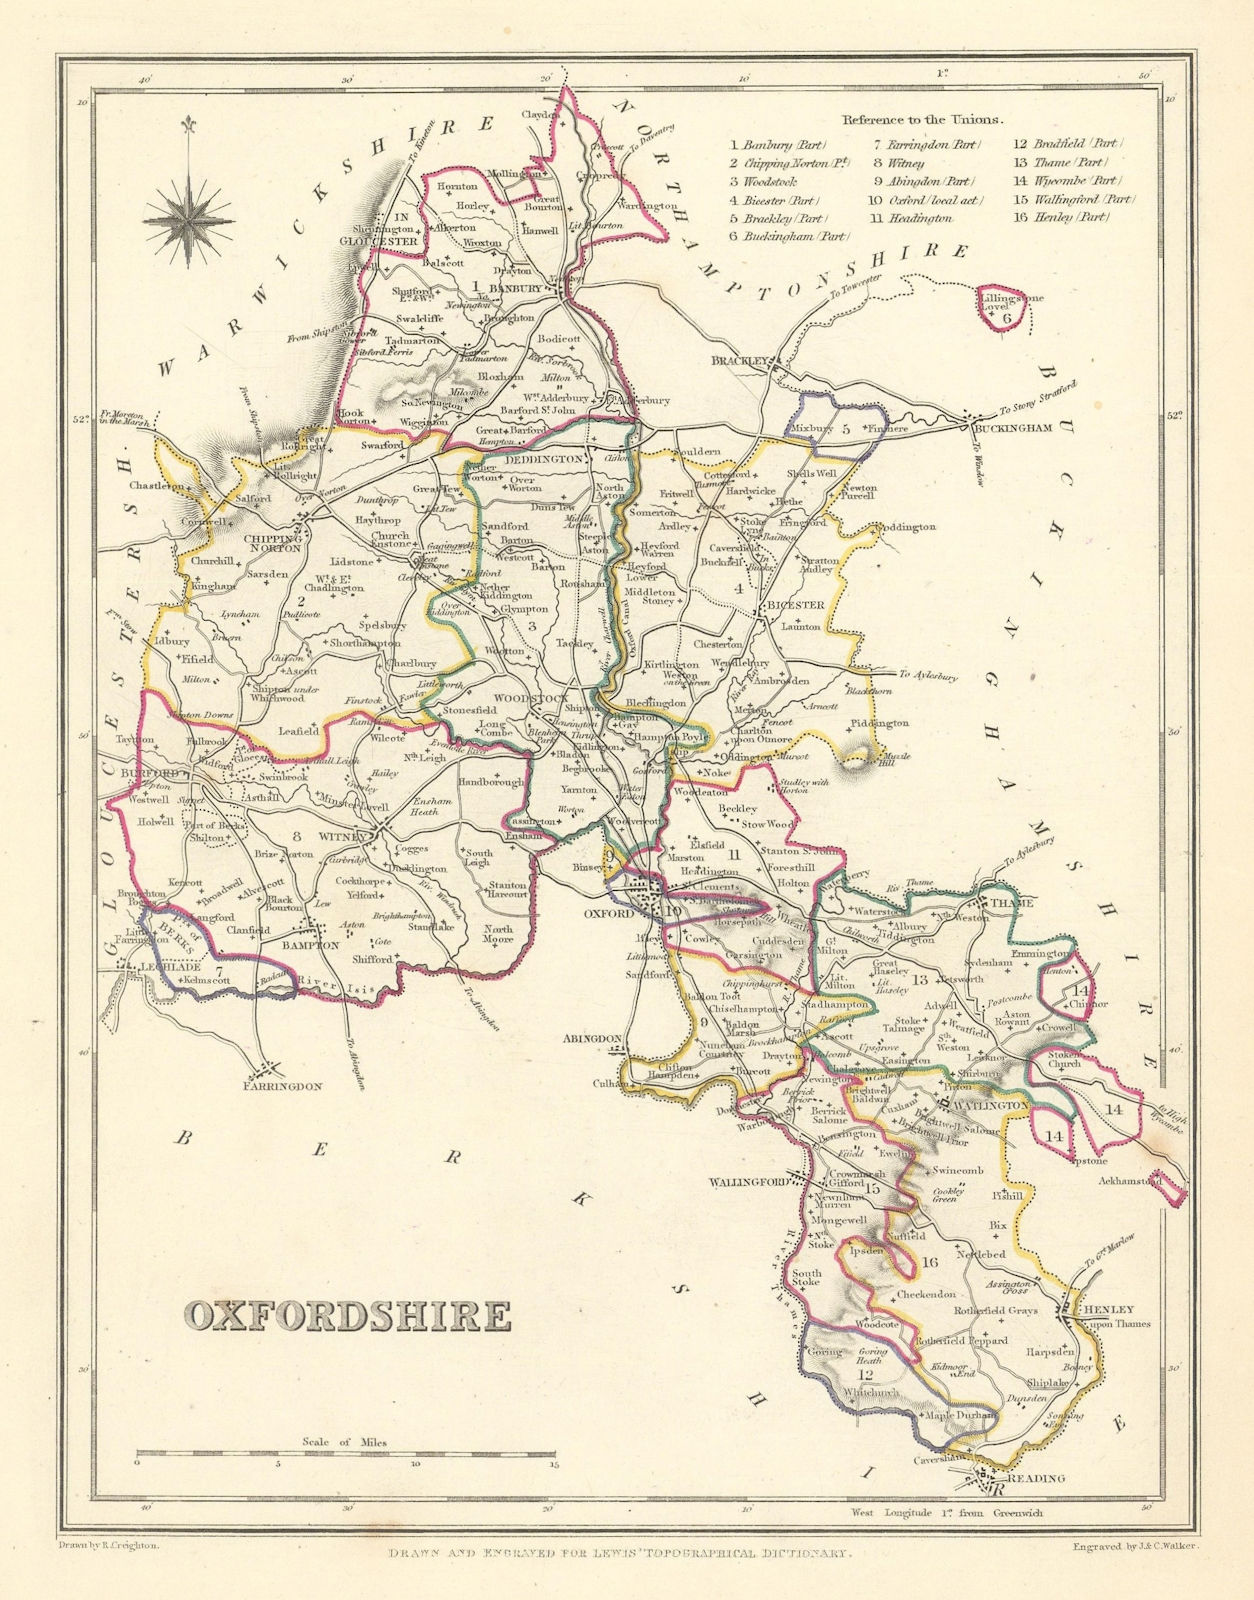 Associate Product Antique county map of OXFORDSHIRE by Creighton & Walker for Lewis c1840